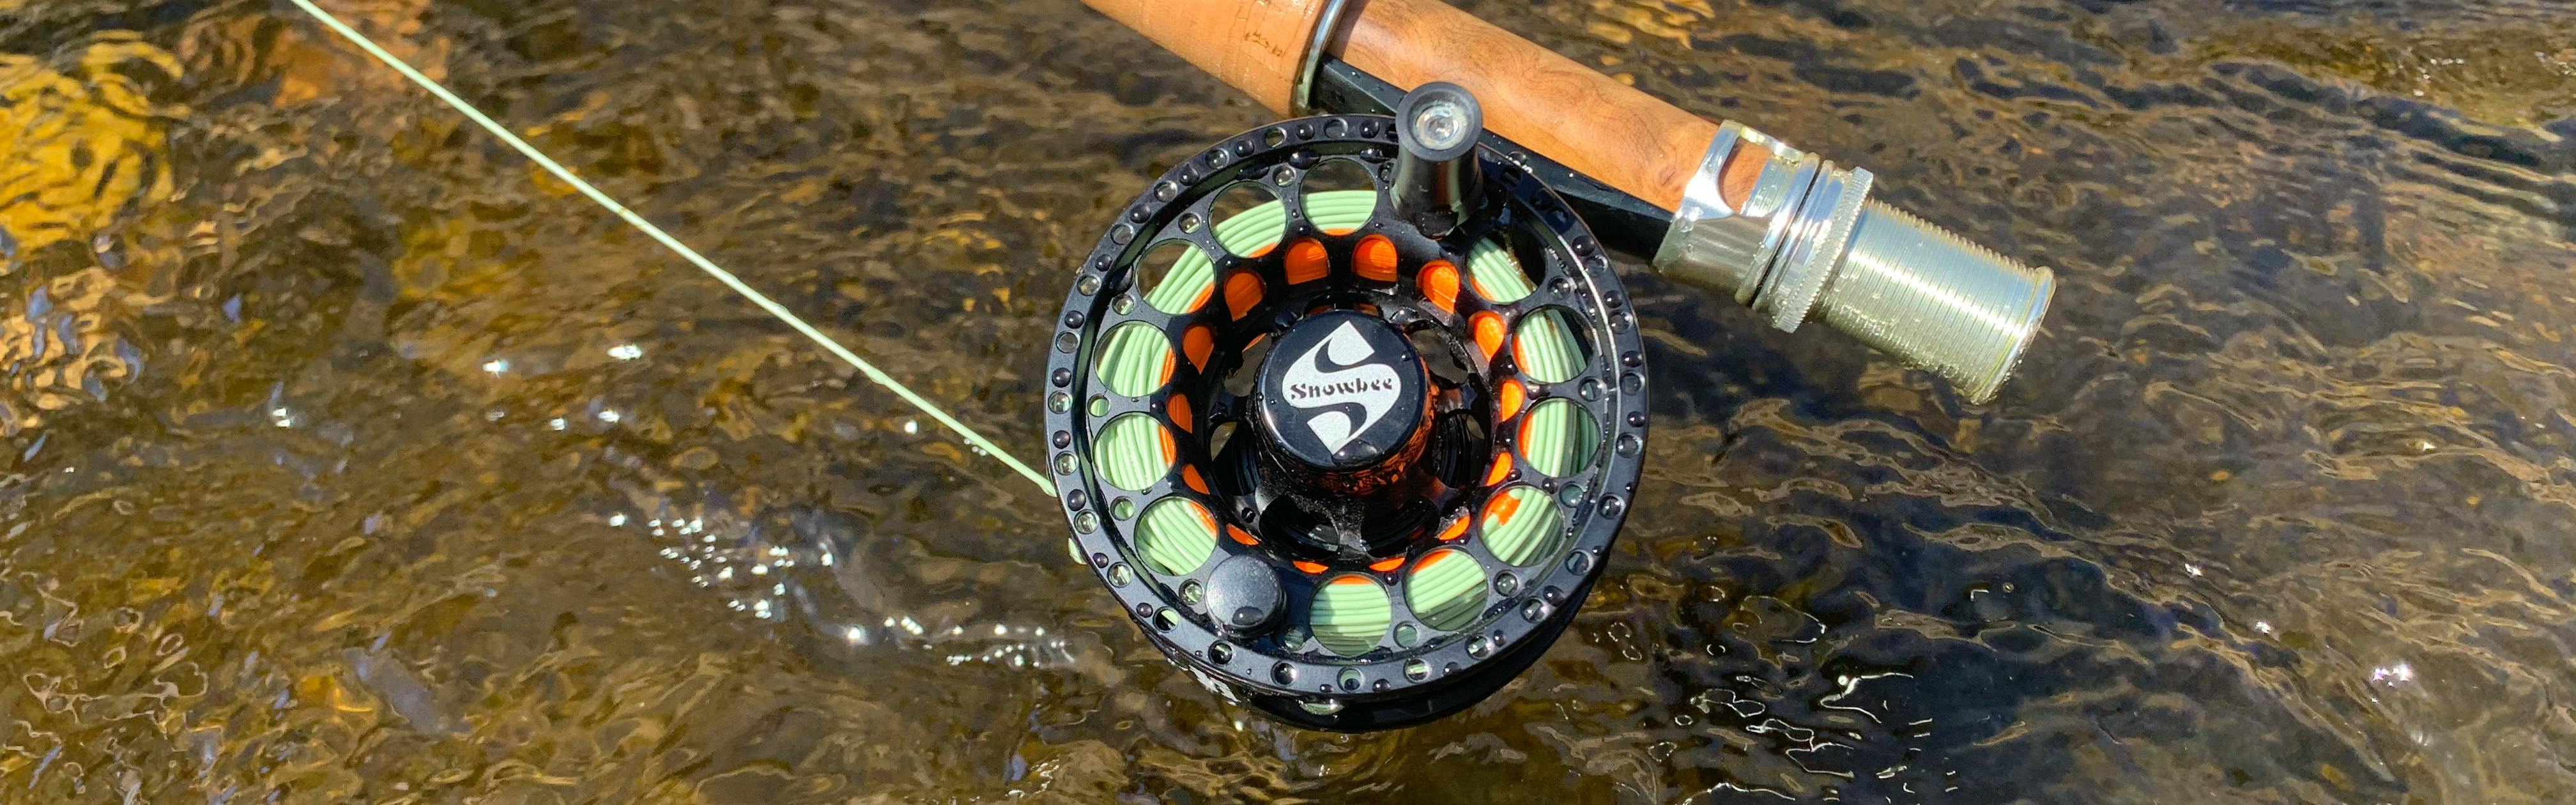 The Fly Fishing Vacation: How to Fly, Drive, or Sneak in your Gear